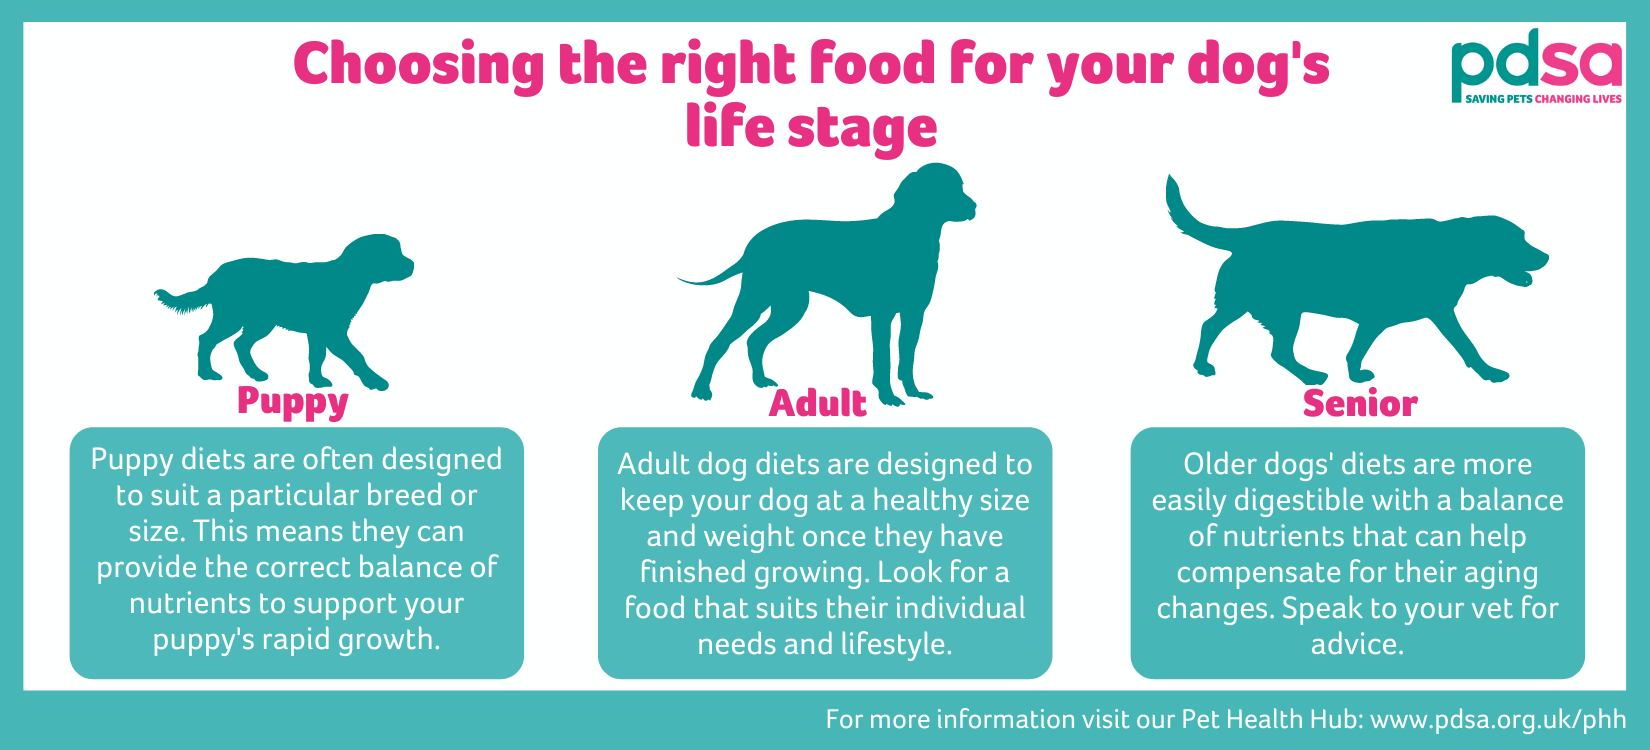 Choosing the right diet for your dog's age